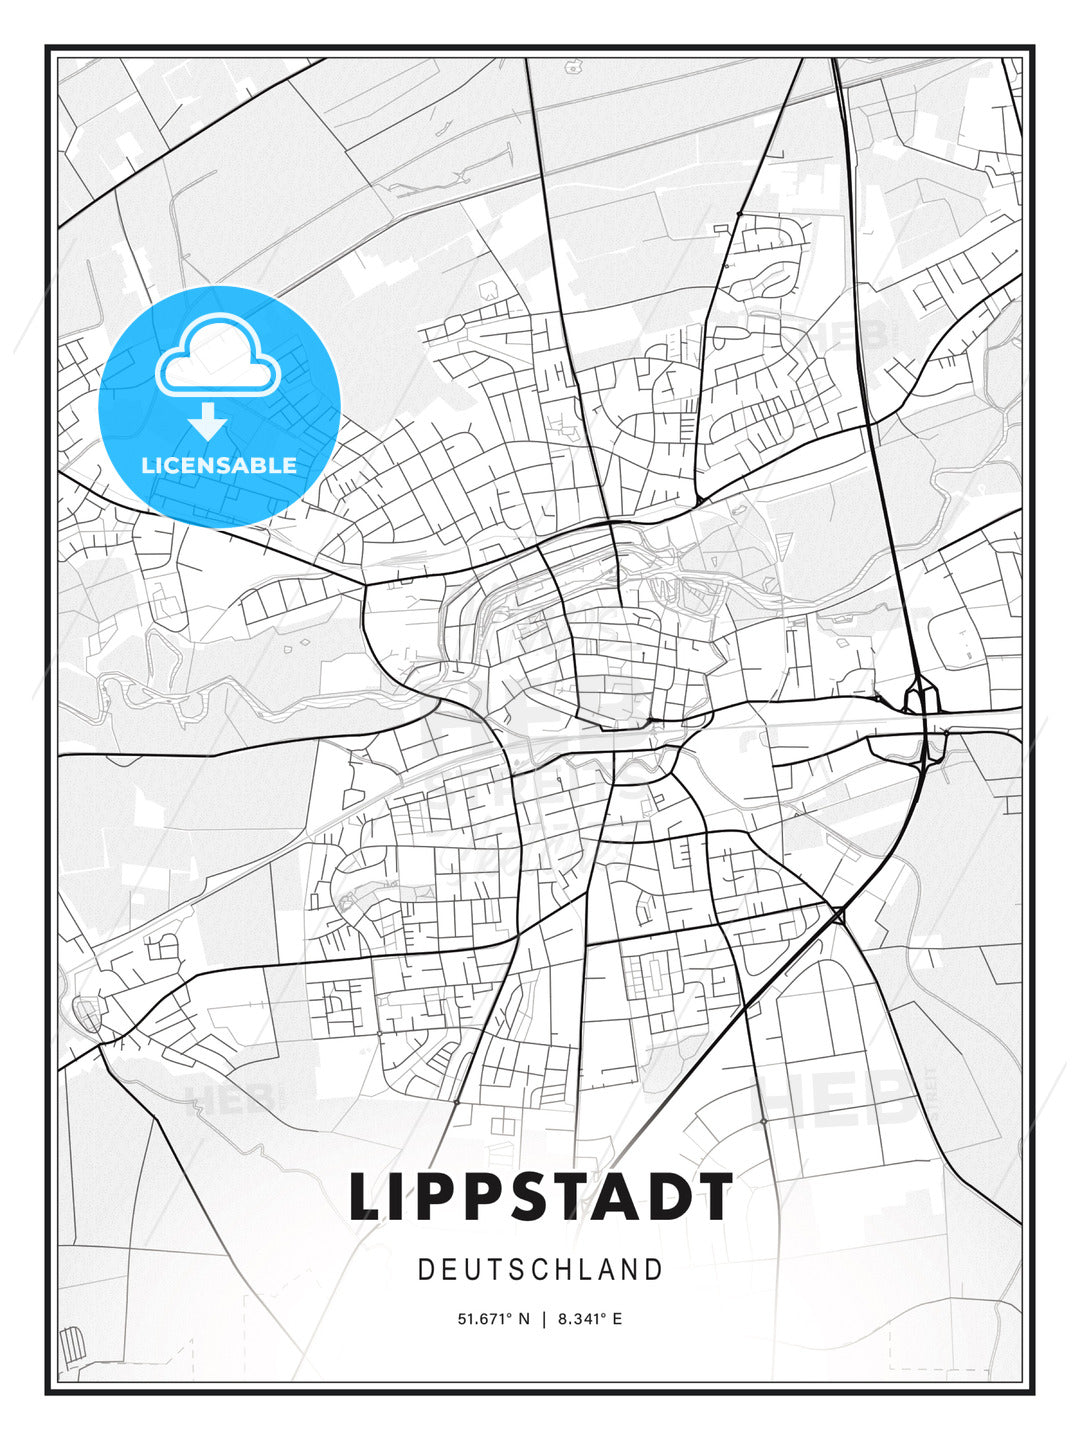 Lippstadt, Germany, Modern Print Template in Various Formats - HEBSTREITS Sketches